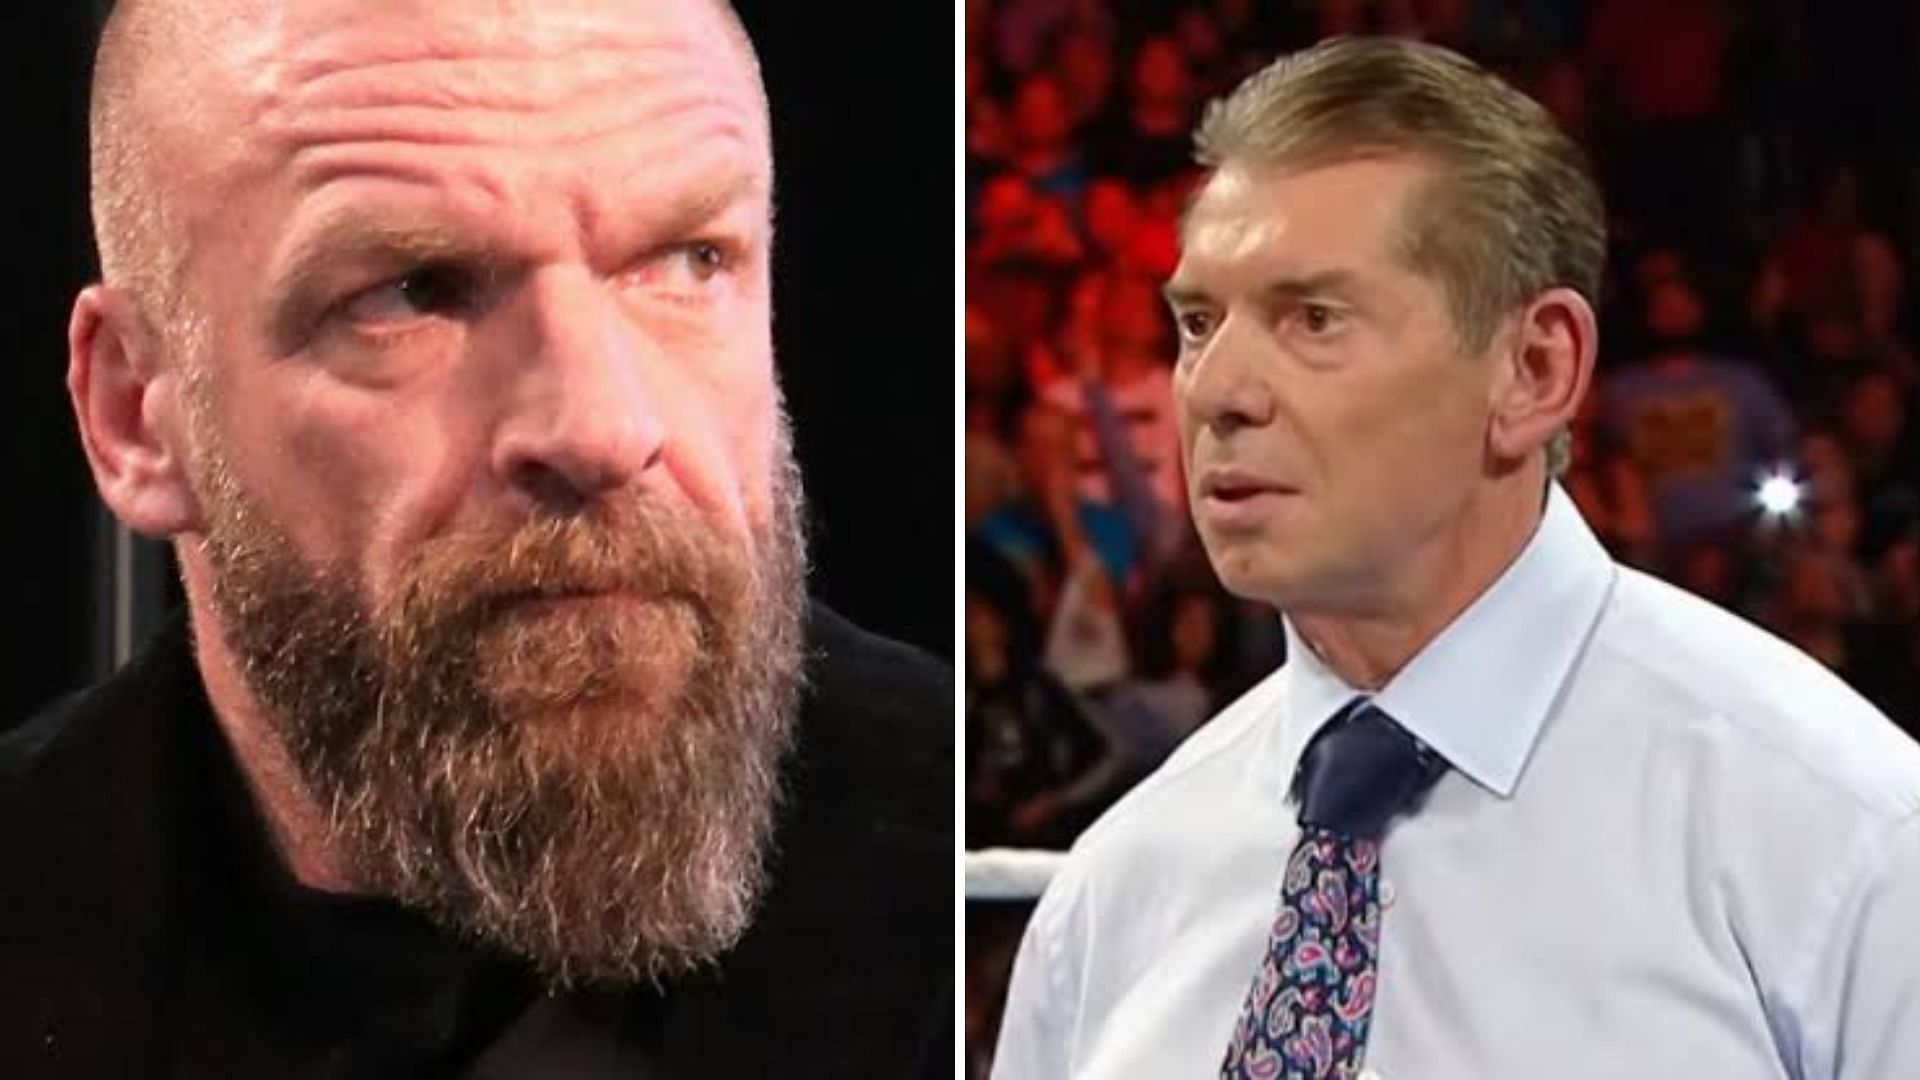 Triple H took over Vince McMahon